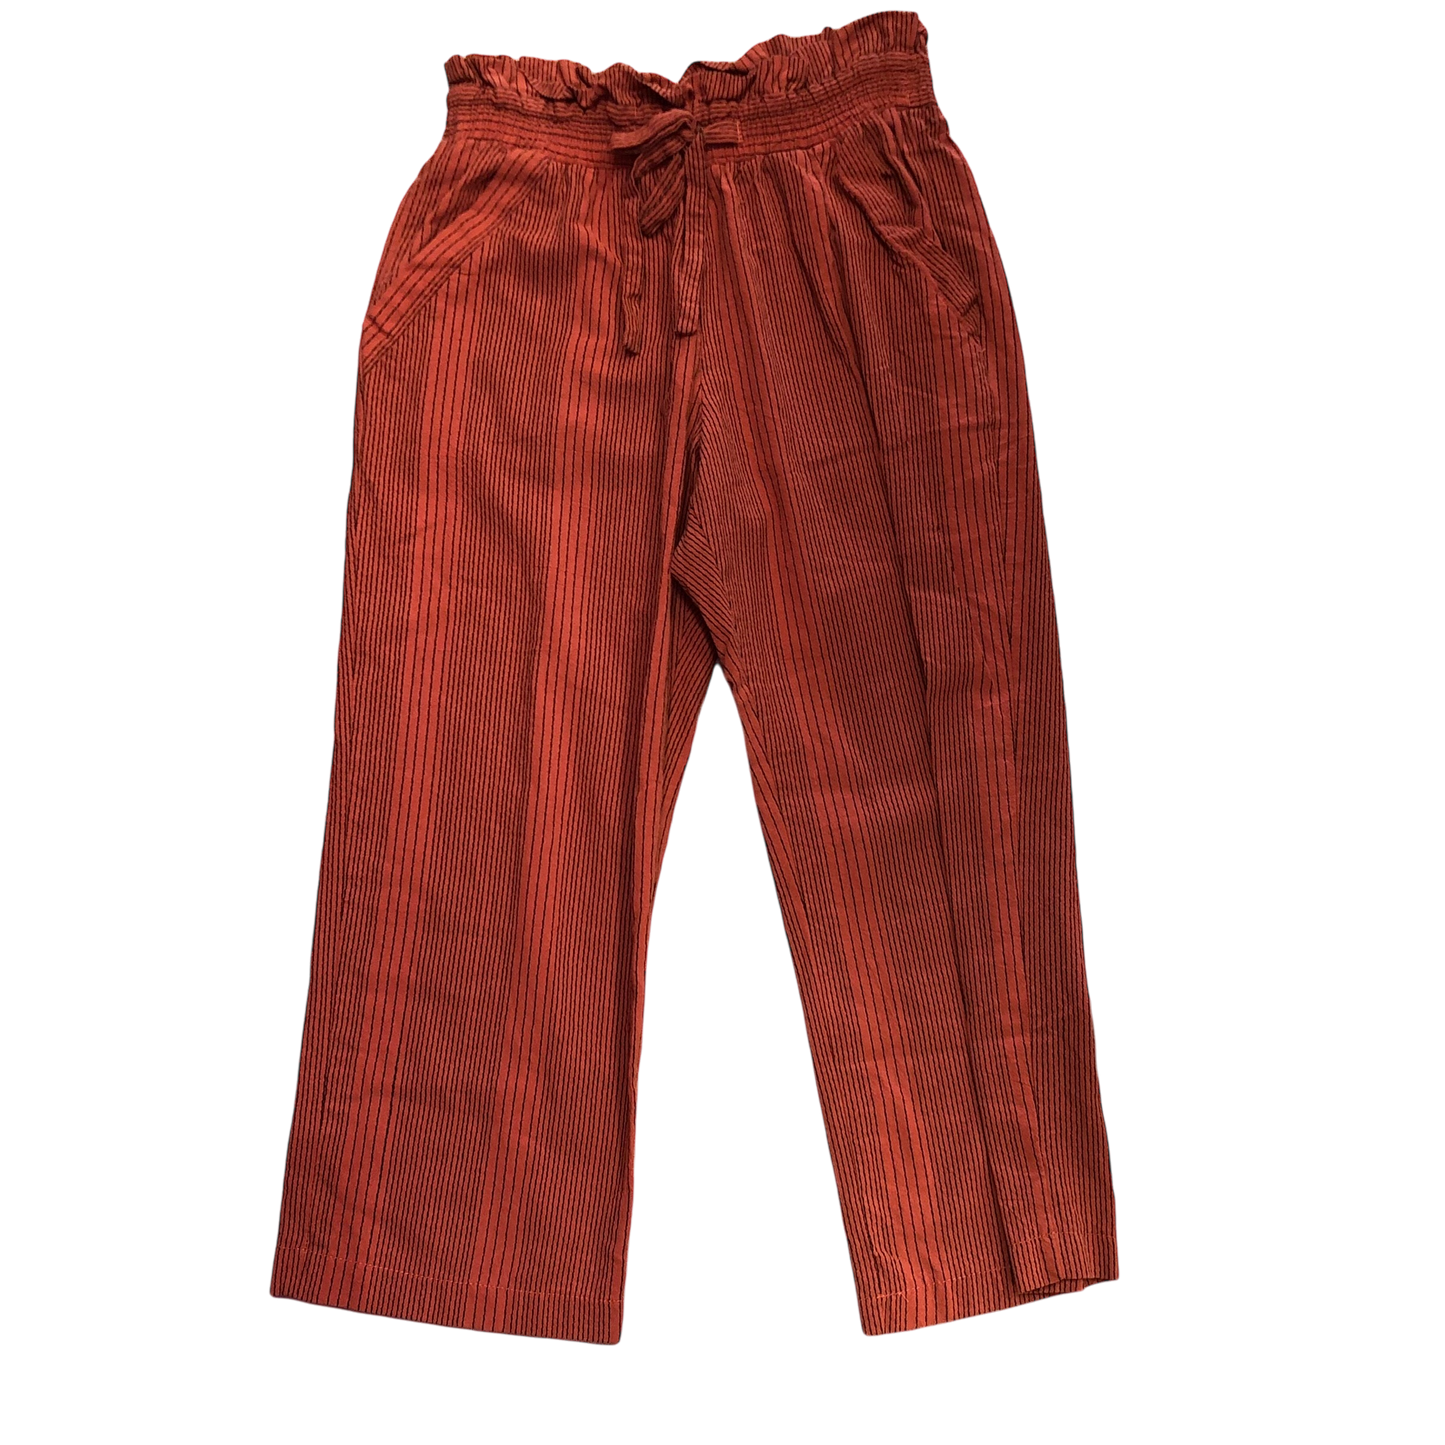 Pants Cropped By Sienna Sky  Size: M